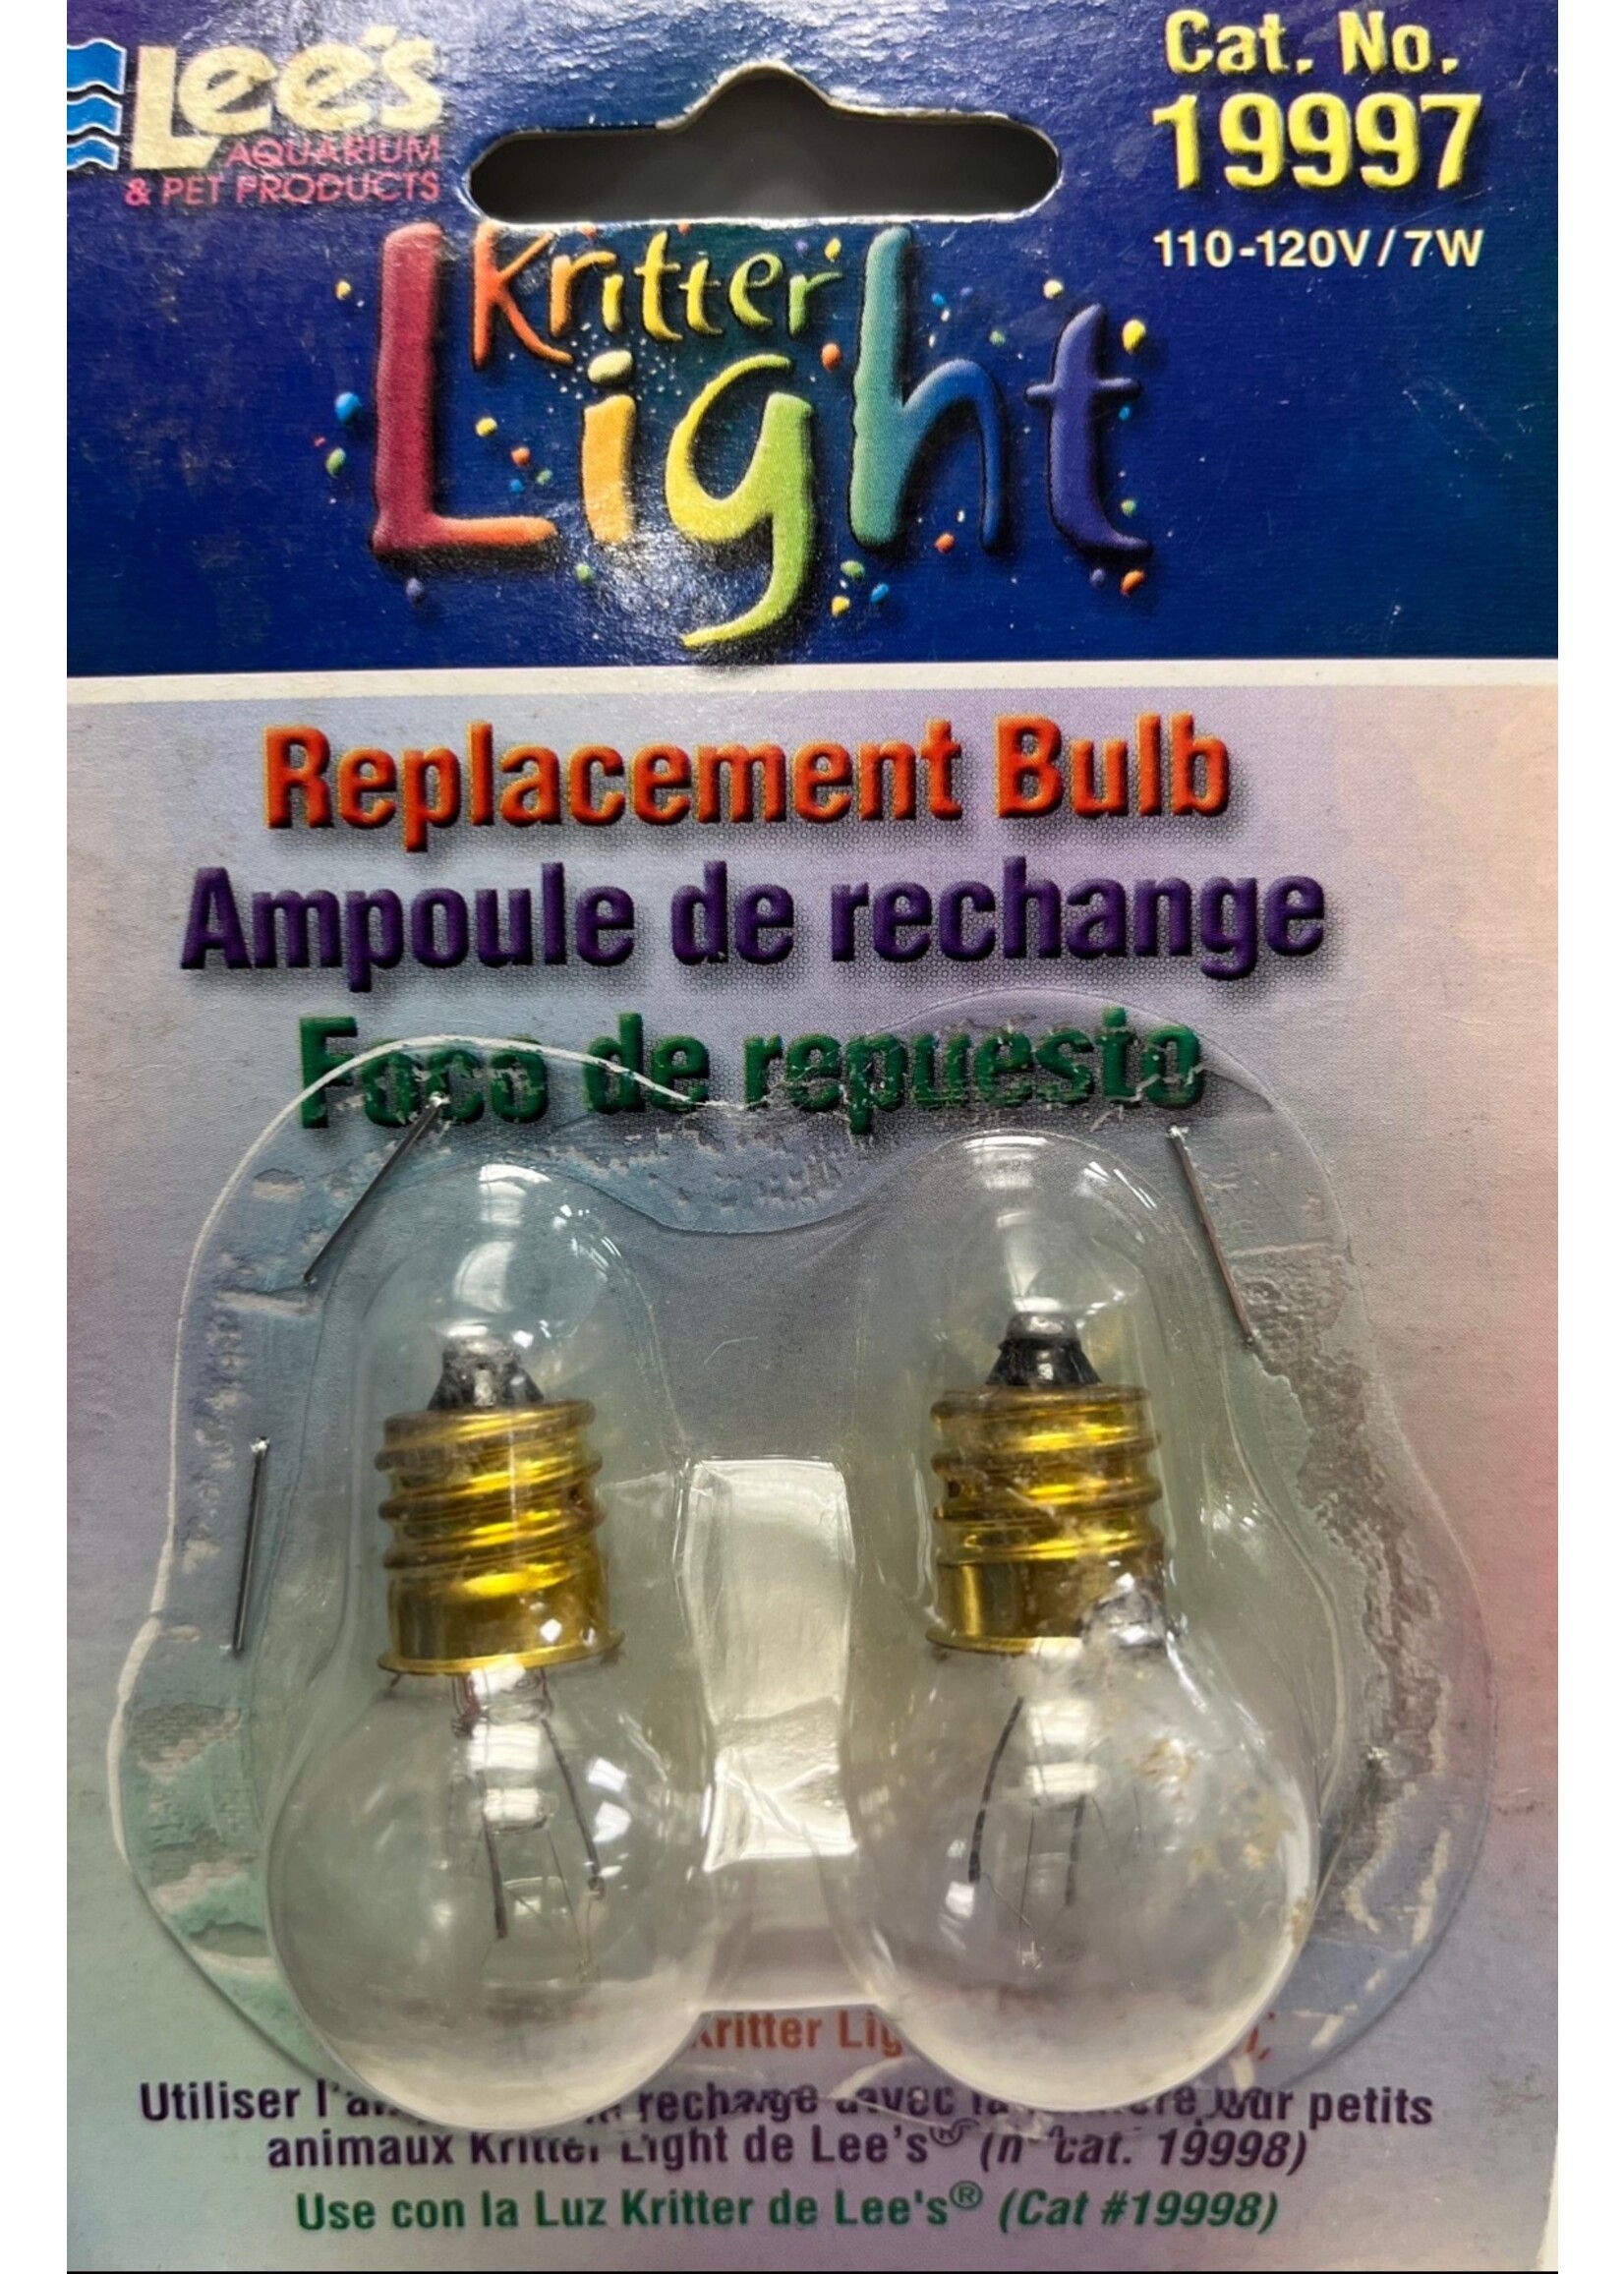 Lee's Lee's Kritter Light Replacement Bulbs 2pack